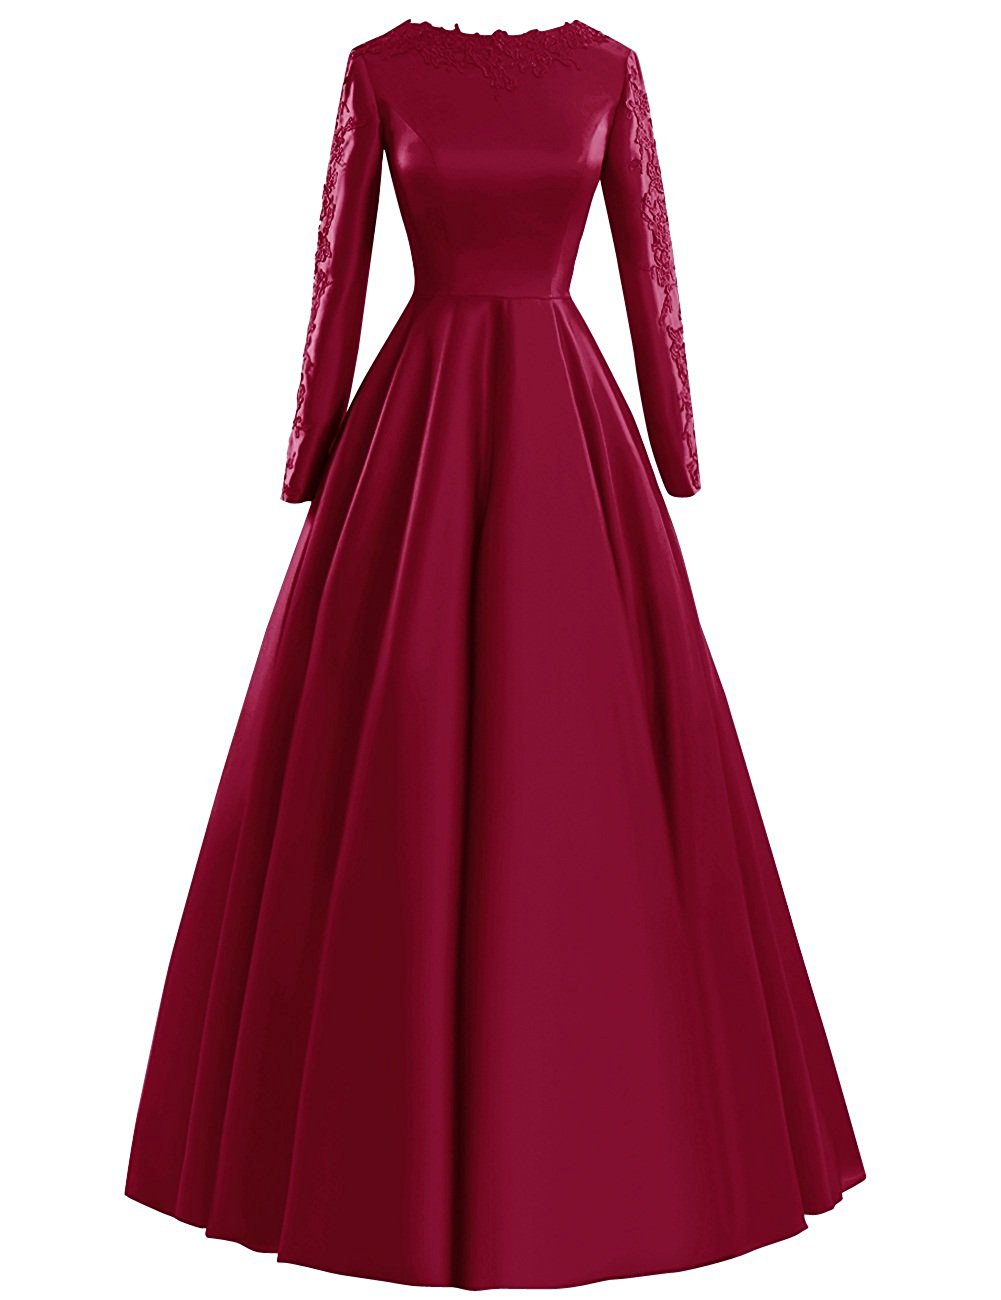 Women's Long Sleeves A-Line Satin Prom Dress with Lace Appliques Floor Length Evening Gowns